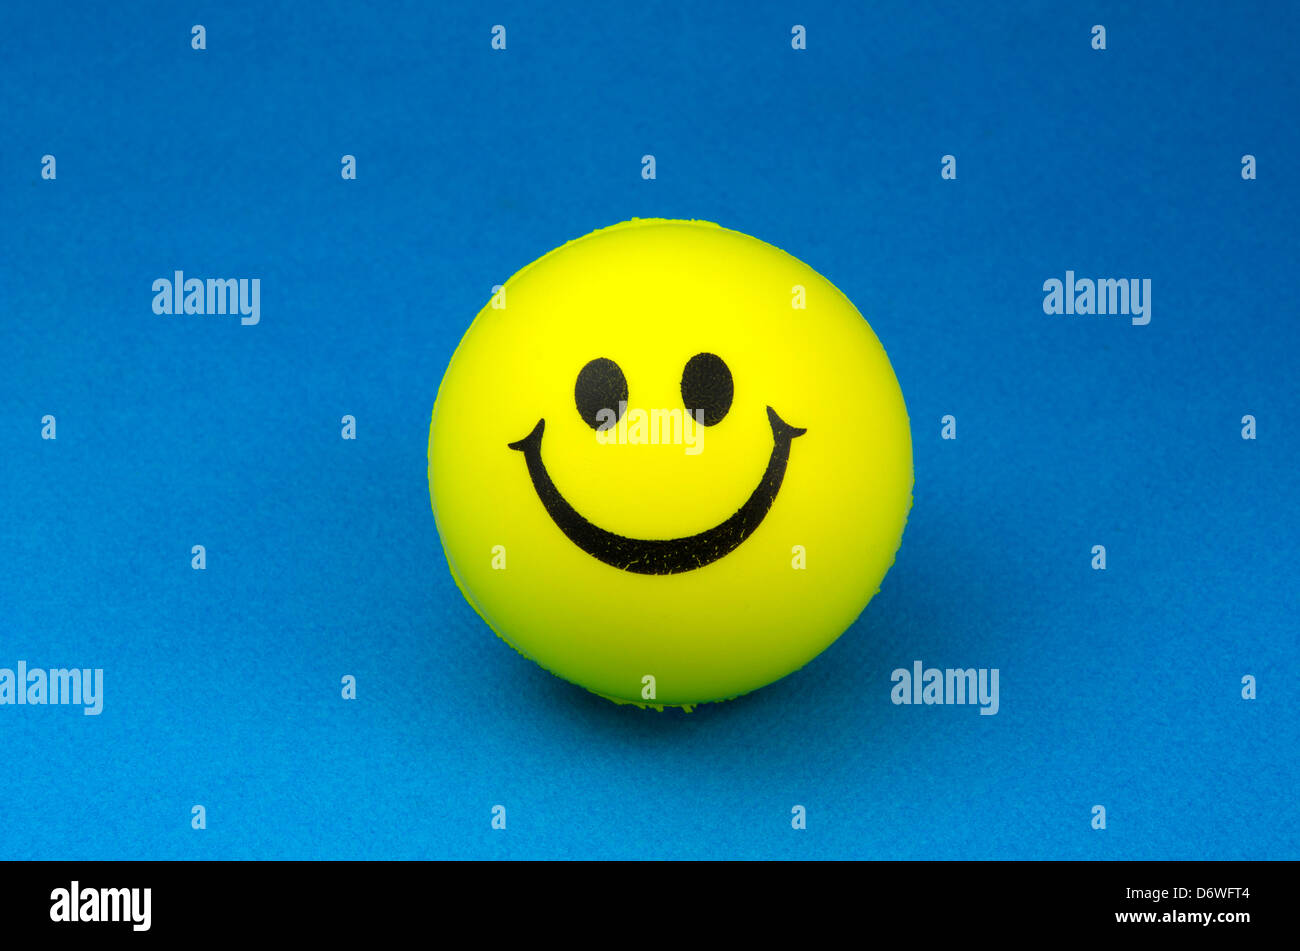 Yellow smiley face on blue background Stock Photo